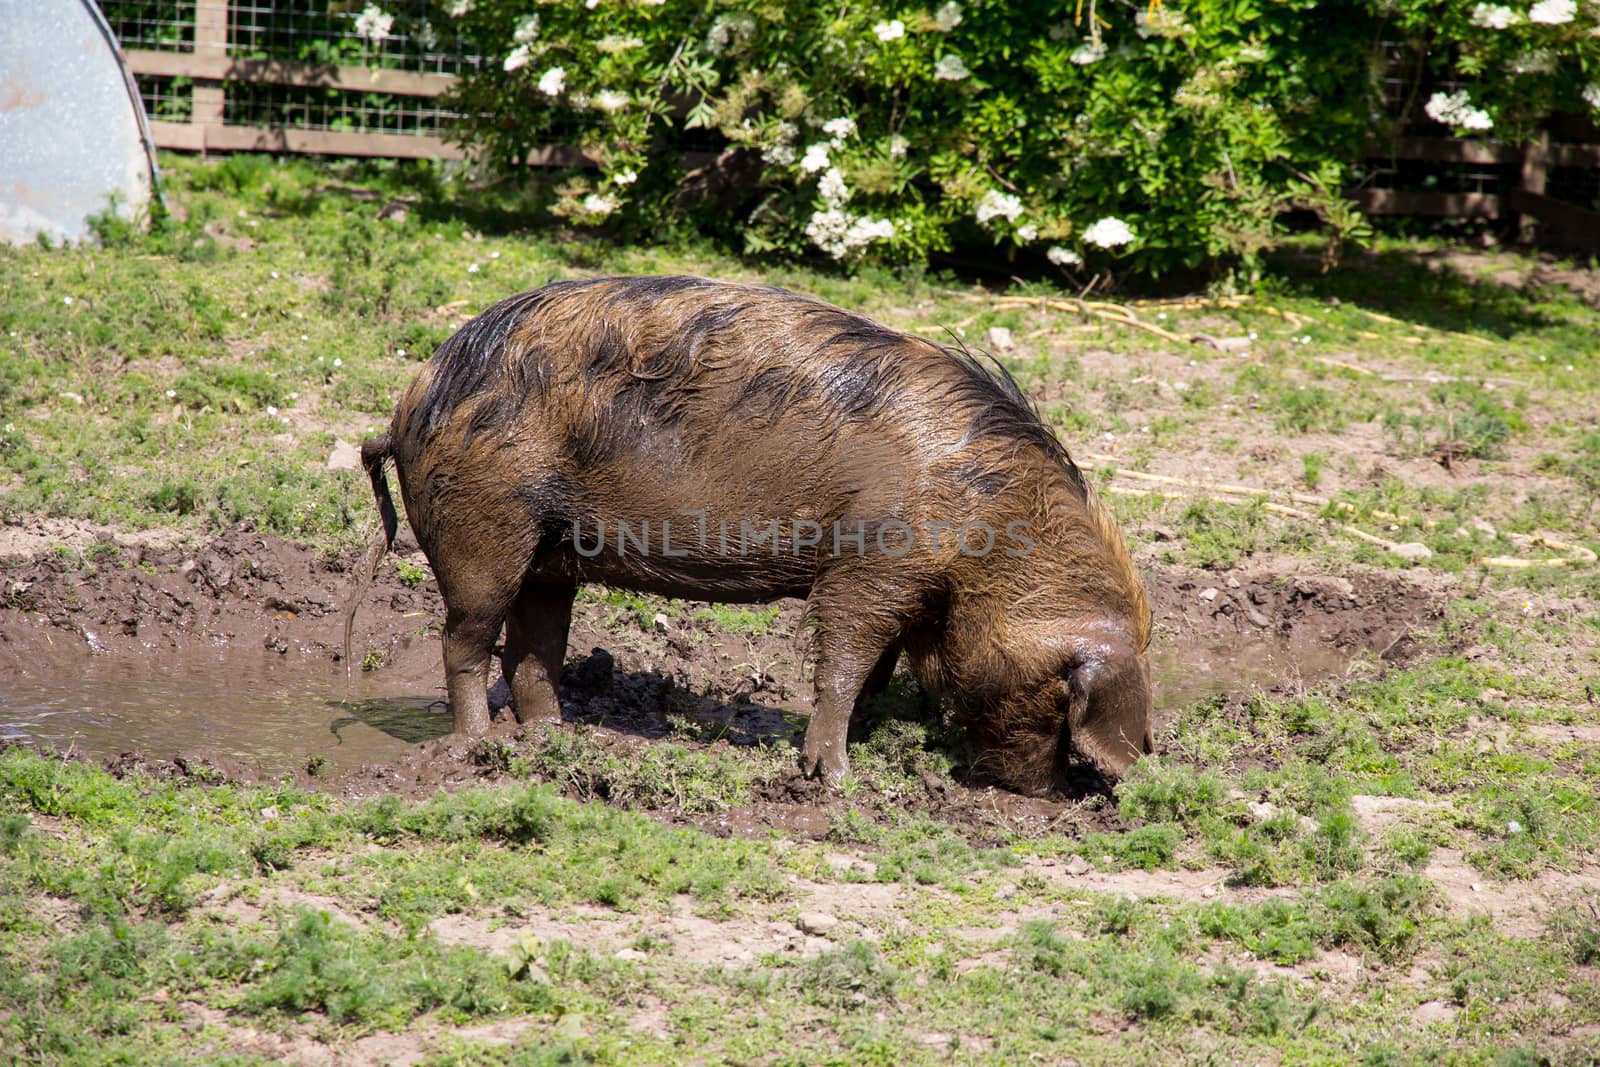 Large Oxford Sandy and Black rare breed pig in a muddy field by magicbones